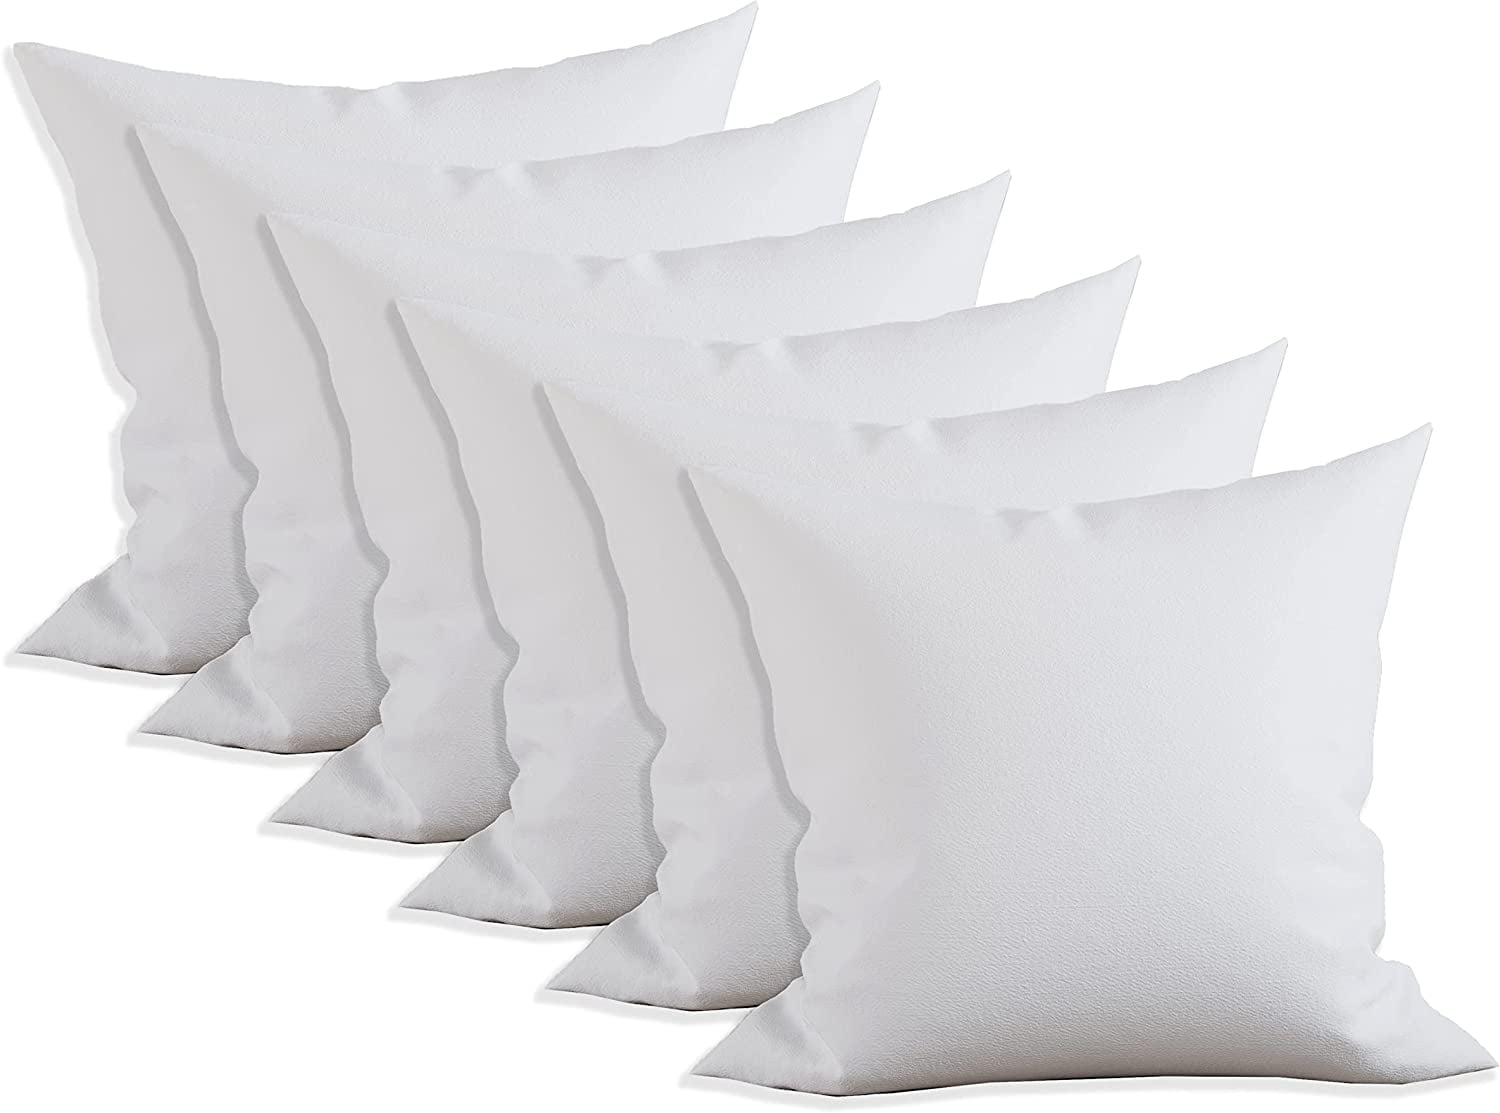 Obruosci Luxury Set of 6 Throw Pillow Inserts, 18 x 18 Hypoallergenic Ultra  Soft White Polyester Microfiber Durable Couch Cushion Fillers